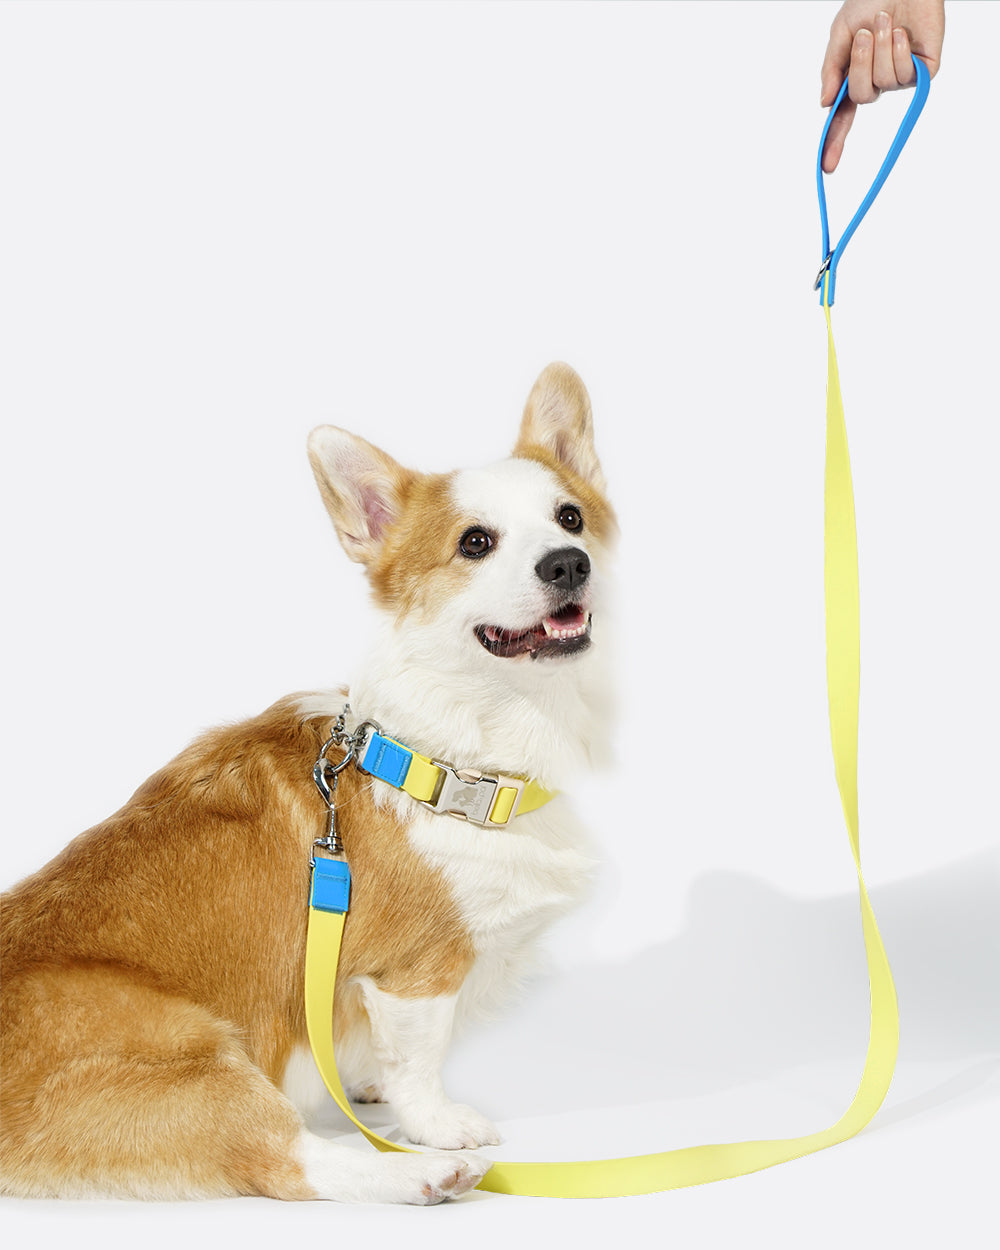 A waterproof dog leash made with PVC material, equipped with a metal D-ring on the handle for attaching a poop bag carrier or key ring, etc. It comes in a red and blue color mix and is available in two width specifications: 2 cm and 2.5 cm.